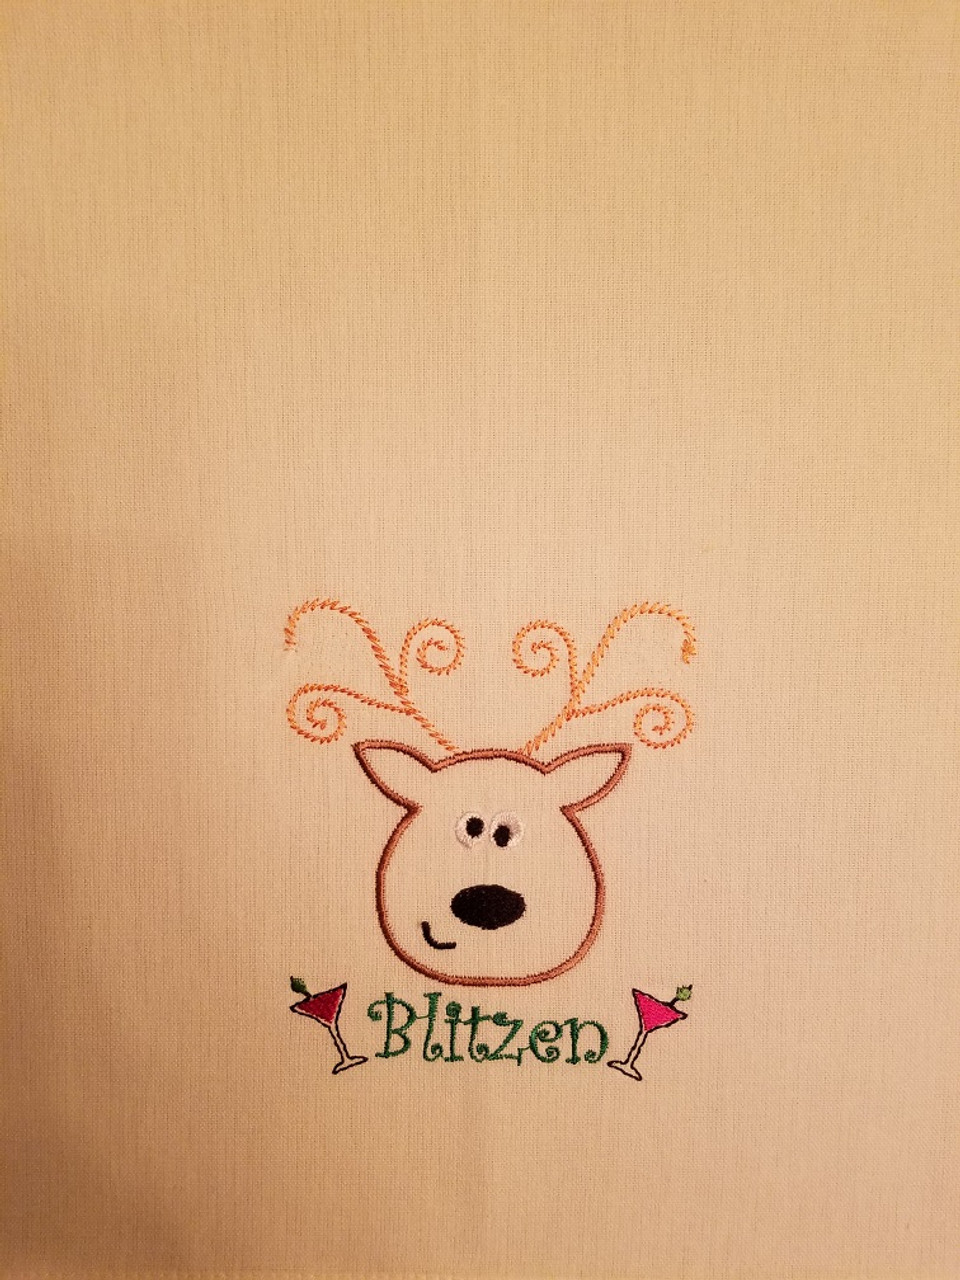 Blitzen - Kitchen Towel - 20" x 28"
Embroidery on a white towel.
100% Cotton with loop, for optional hanging.
Machine washable in cool water and tumble dry at low temperature.
Minimal shrinkage.
Size: 20" x 28"